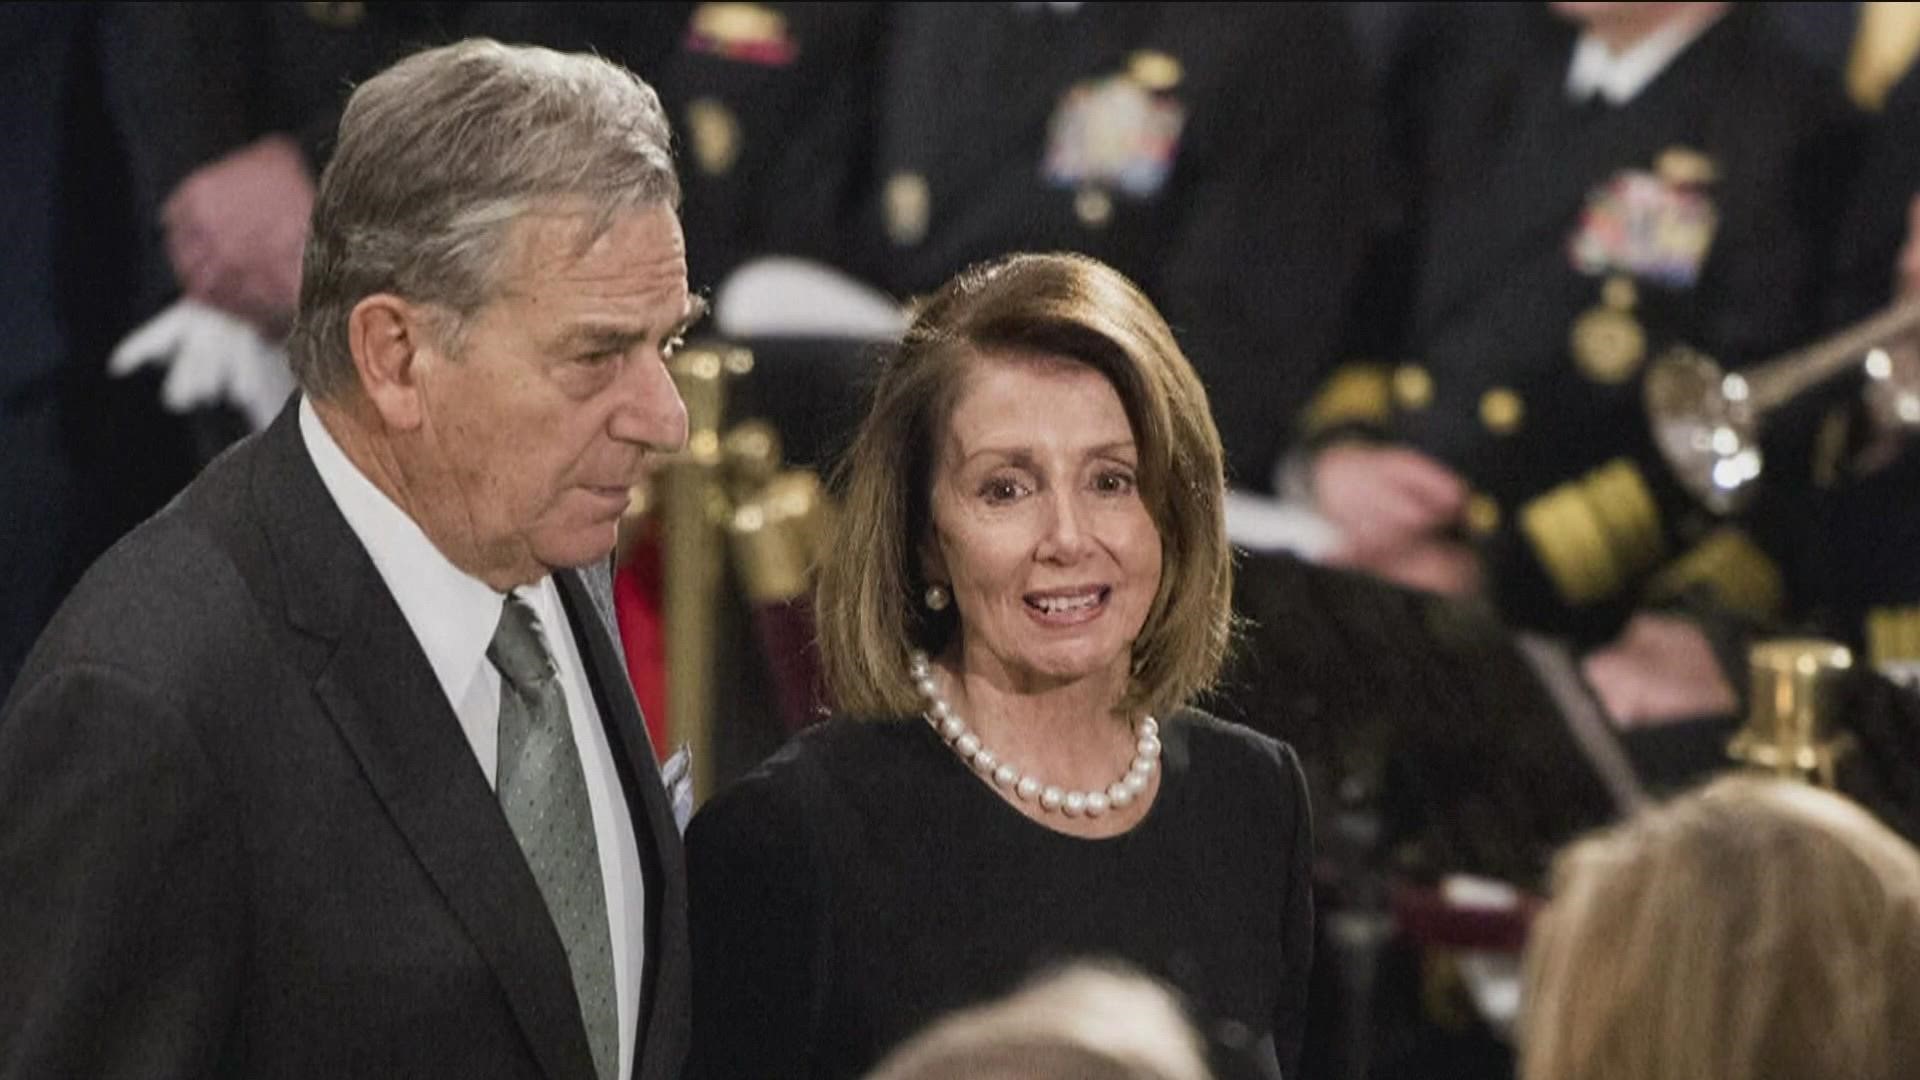 The intruder who attacked Paul Pelosi was reportedly searching for House Speaker Nancy Pelosi, shouting "Where is Nancy, where is Nancy?" before assaulting Paul.